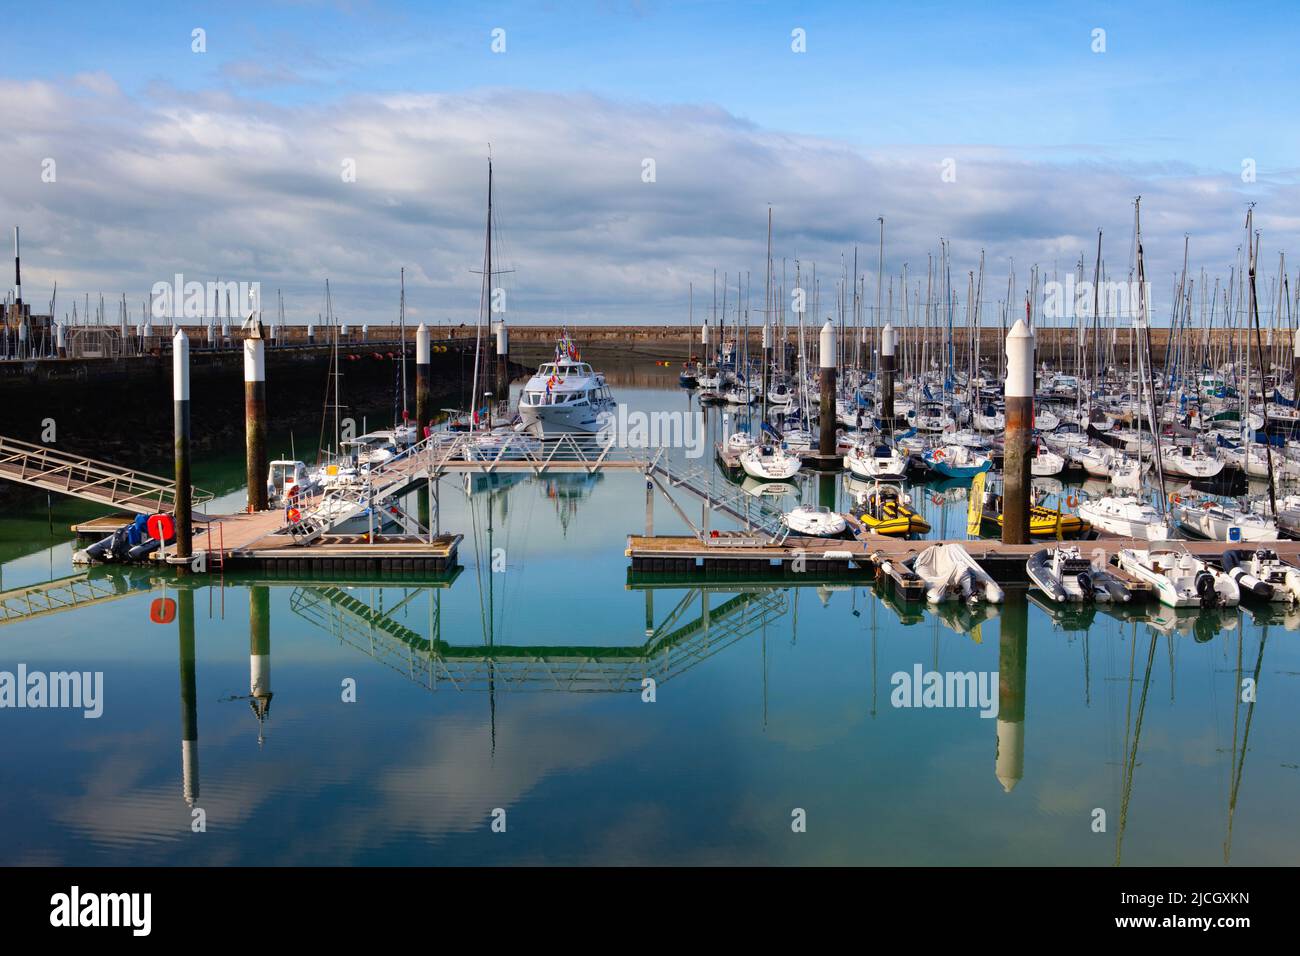 Le Havre,France - 13 October, 2021: End of Season. Low-tide in yacht harbour in Le Havre, France. Stock Photo